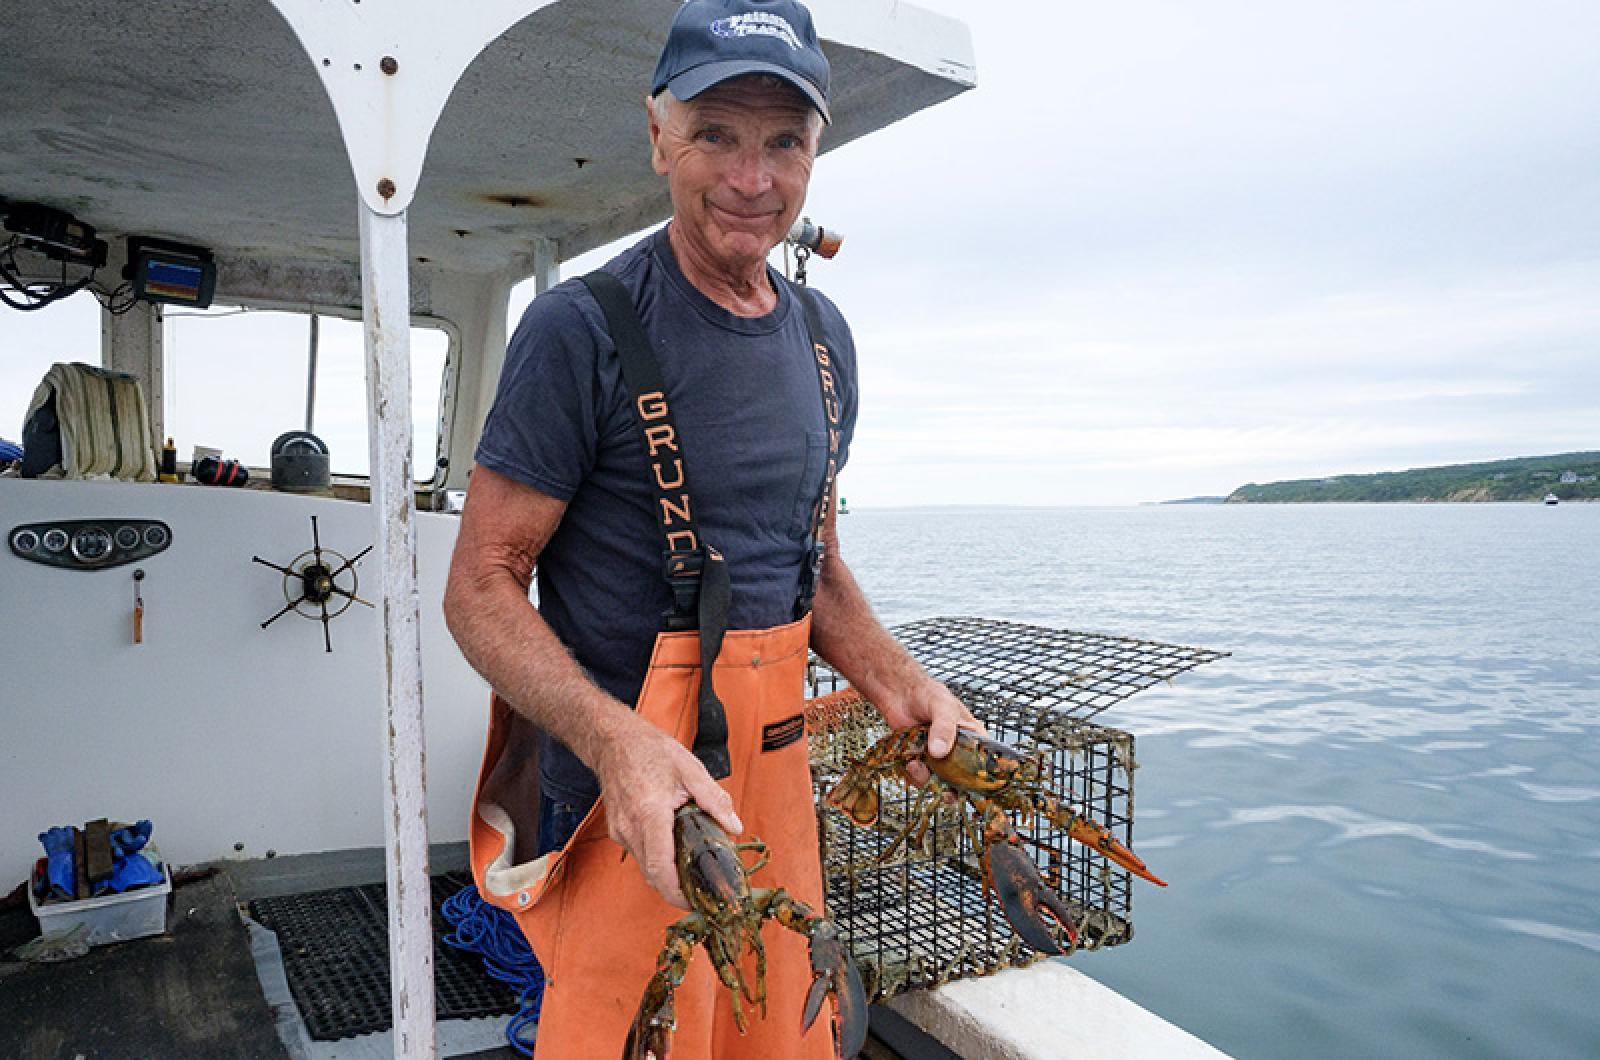 The Vineyard Gazette - Martha's Vineyard News  Keeping It Simple on the  Water, Hauling Traps and Filling Pots